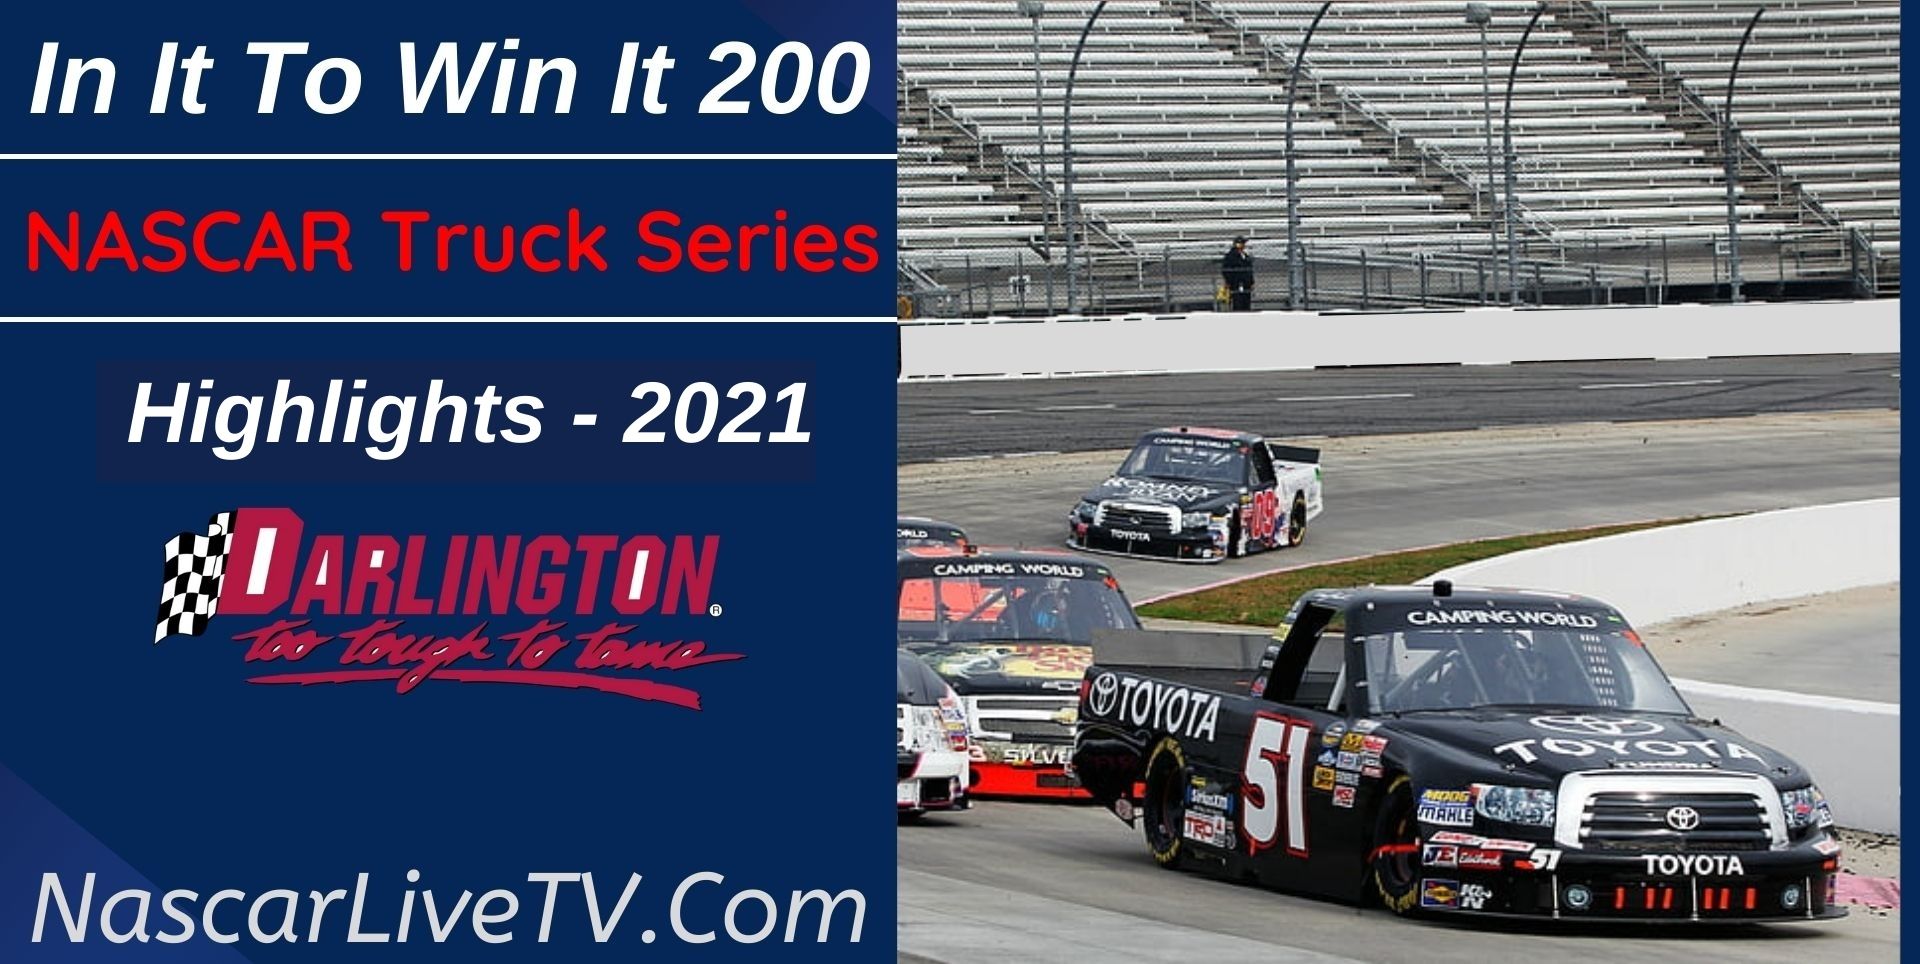 In It To Win It 200 Highlights NASCAR Truck Series 2021